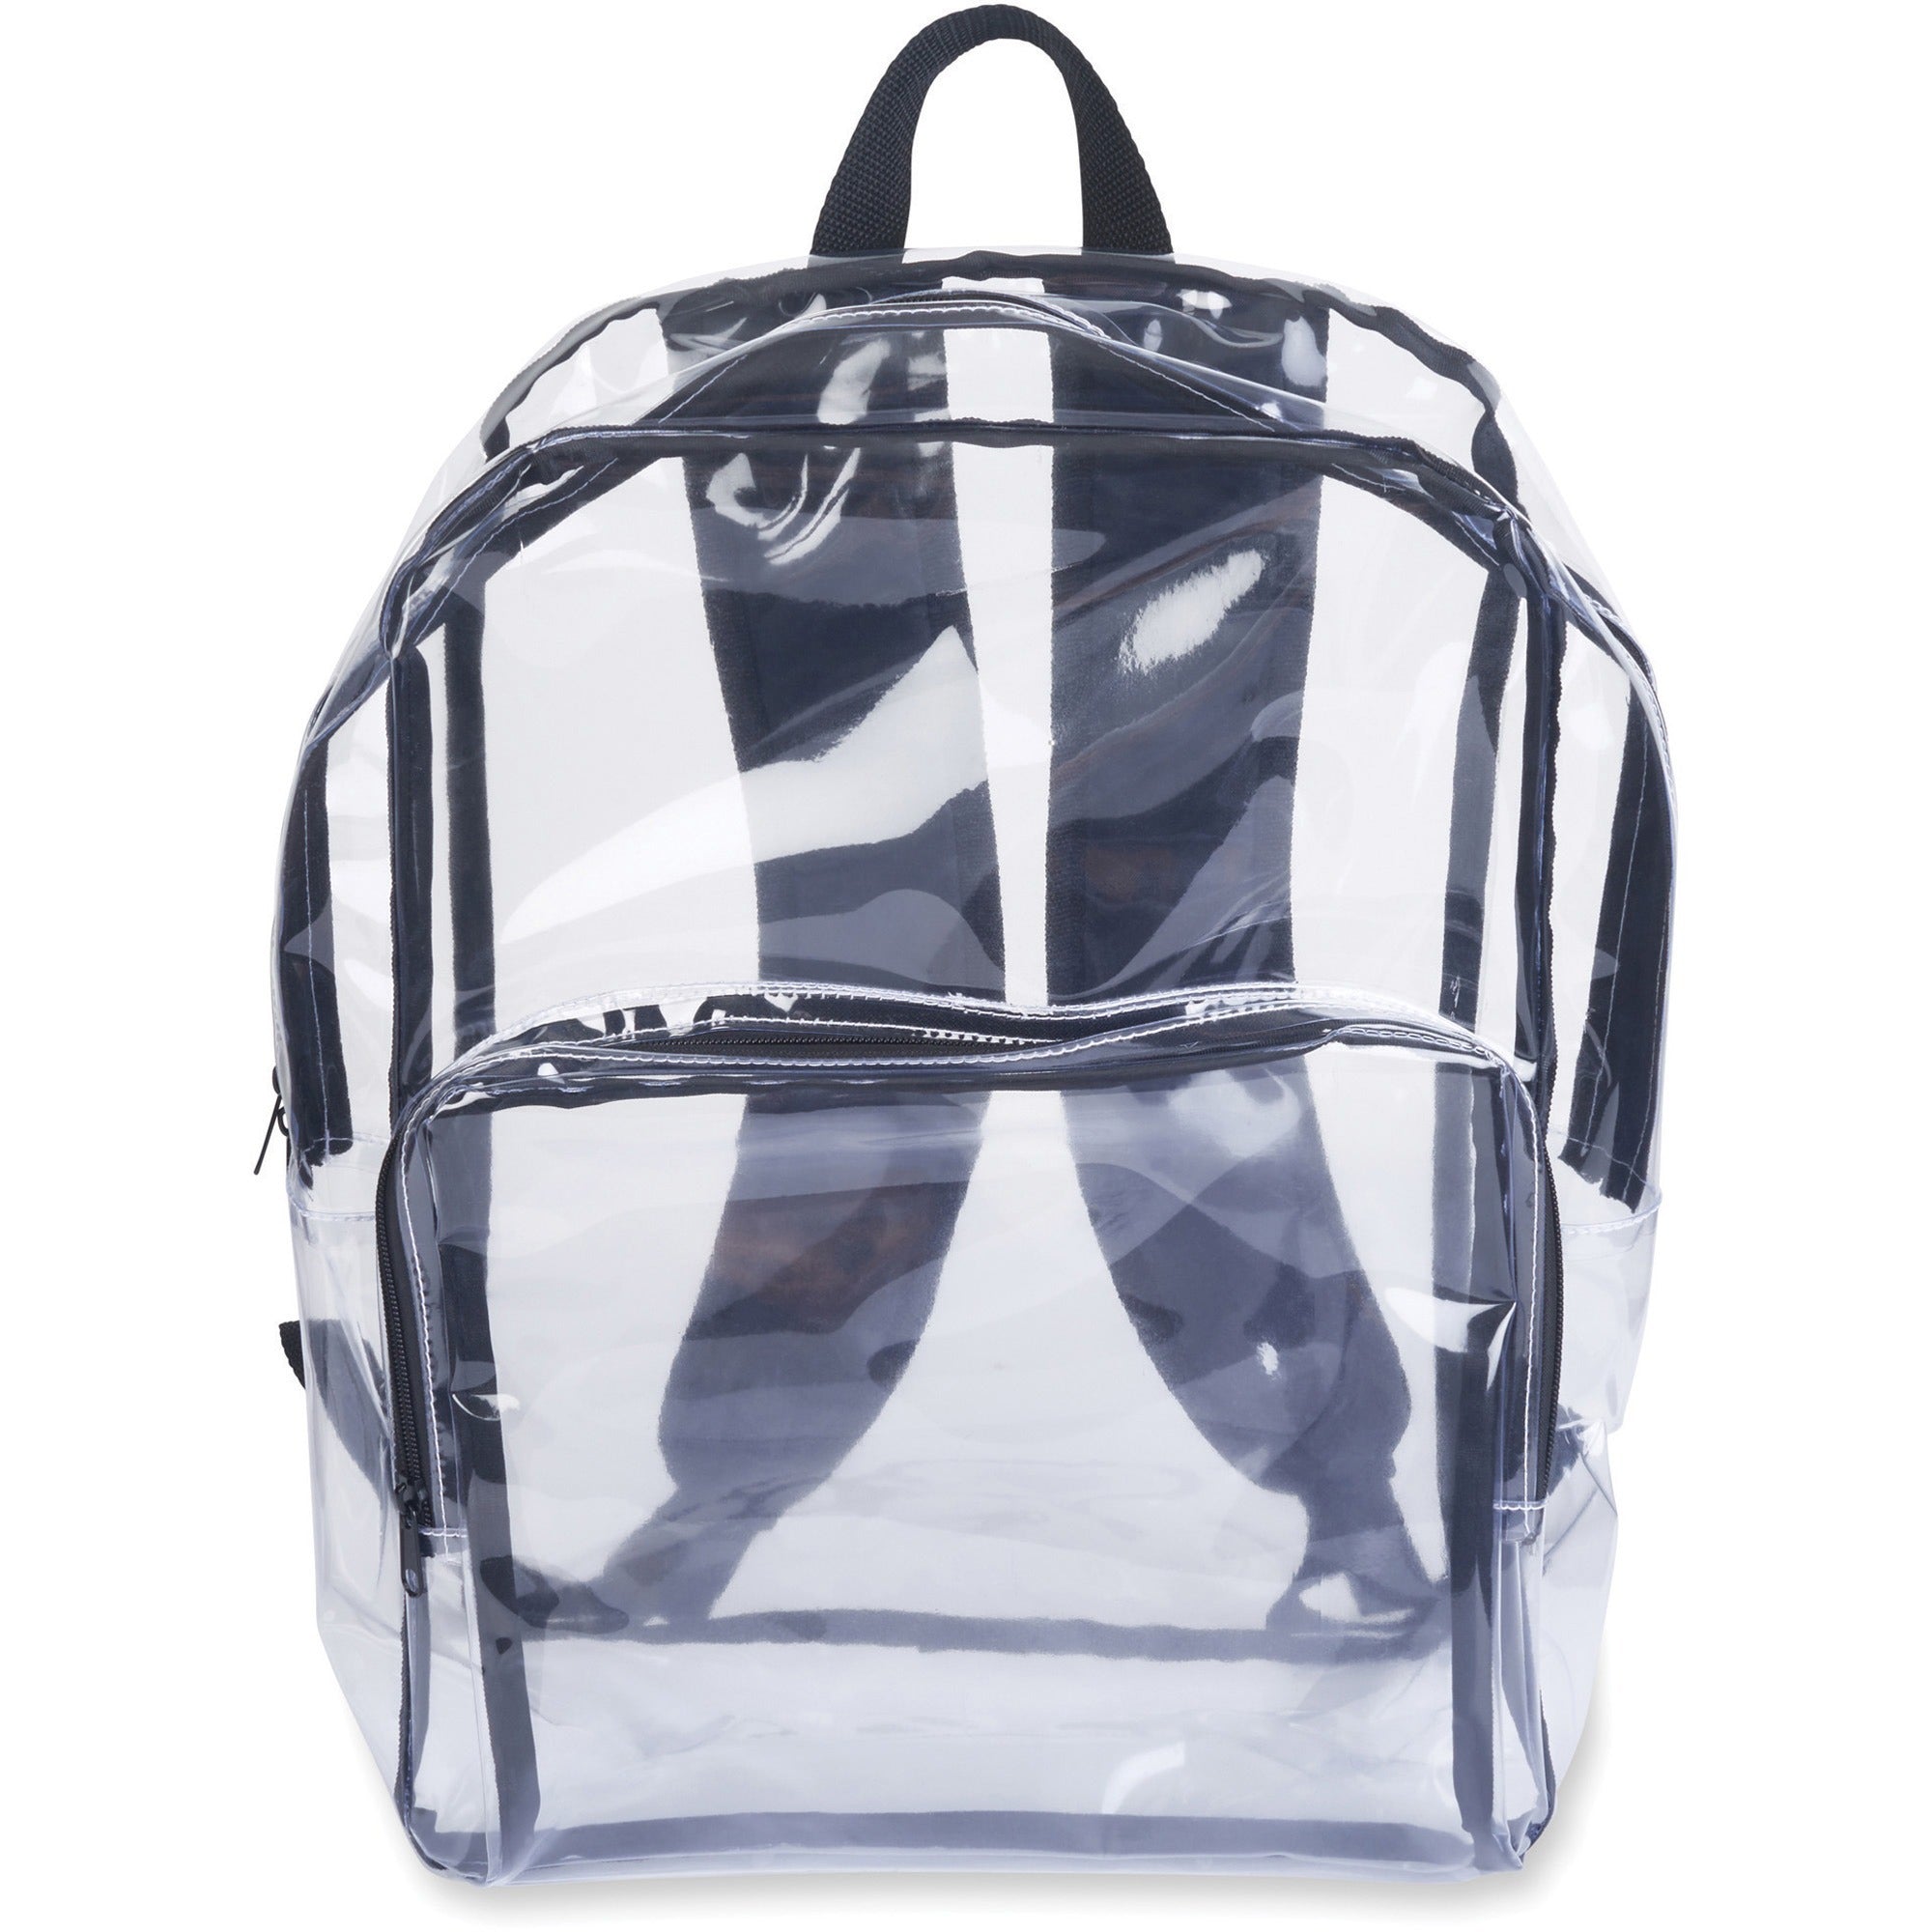 tatco-carrying-case-backpack-notebook-clear-black-vinyl-body-shoulder-strap-175-height-x-143-width-x-55-depth-1-each_tco63225 - 1